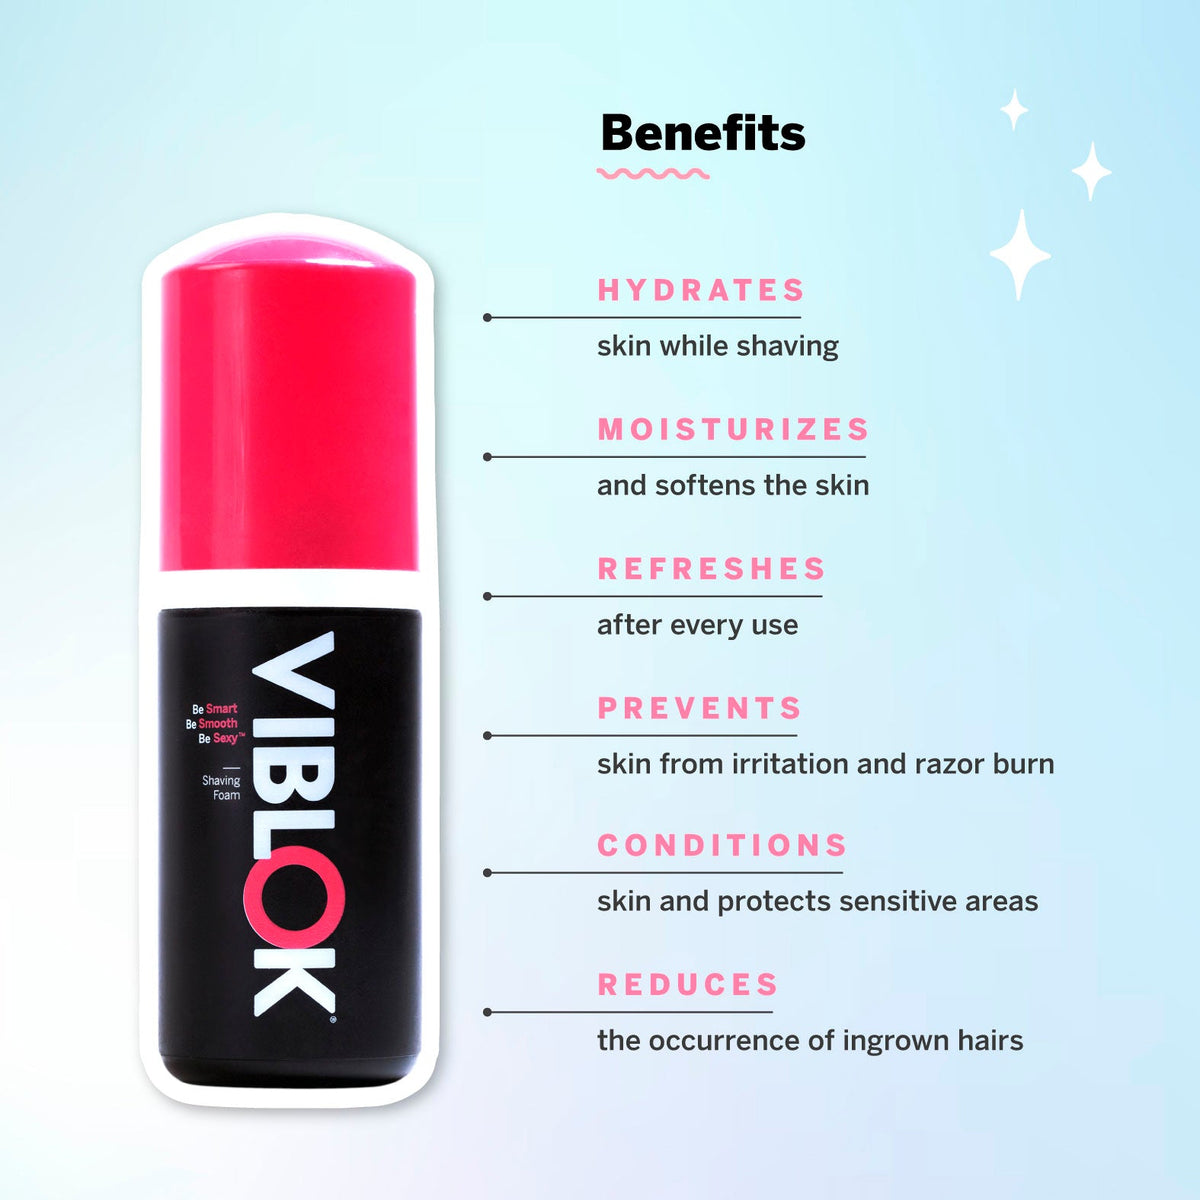 VIBLOK Shaving Foam bottle with the description of the benefits on the right side. It says hydrates, moisturizes, refreshes, prevents, conditions and reduces ingrown hairs.